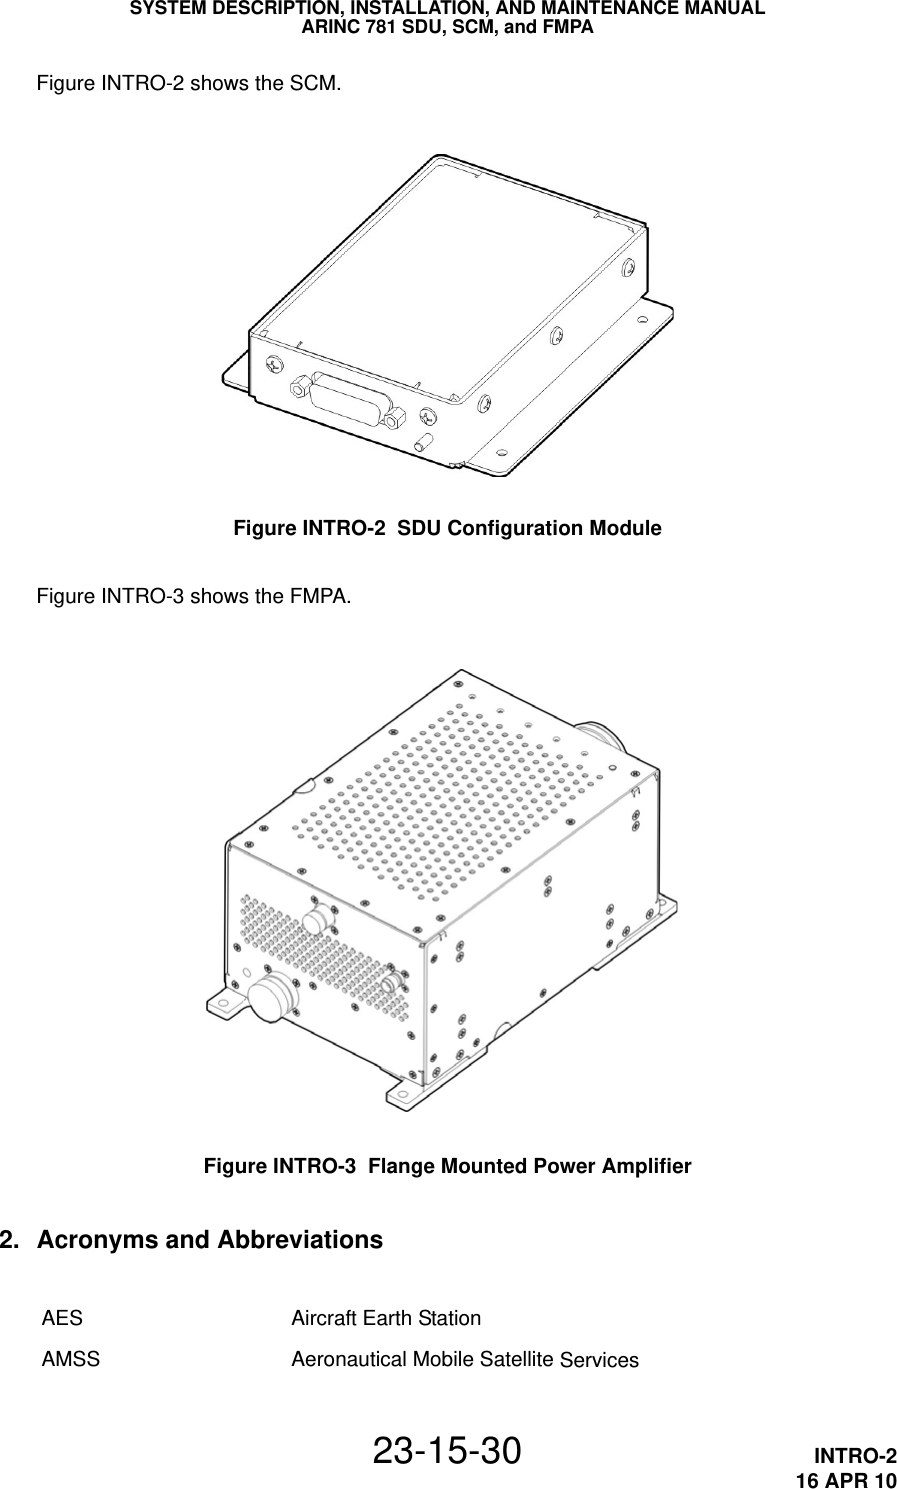 SYSTEM DESCRIPTION, INSTALLATION, AND MAINTENANCE MANUALARINC 781 SDU, SCM, and FMPA23-15-30 INTRO-216 APR 10Figure INTRO-2 shows the SCM.Figure INTRO-2  SDU Configuration ModuleFigure INTRO-3 shows the FMPA.Figure INTRO-3  Flange Mounted Power Amplifier2. Acronyms and AbbreviationsAES Aircraft Earth StationAMSS Aeronautical Mobile Satellite Services